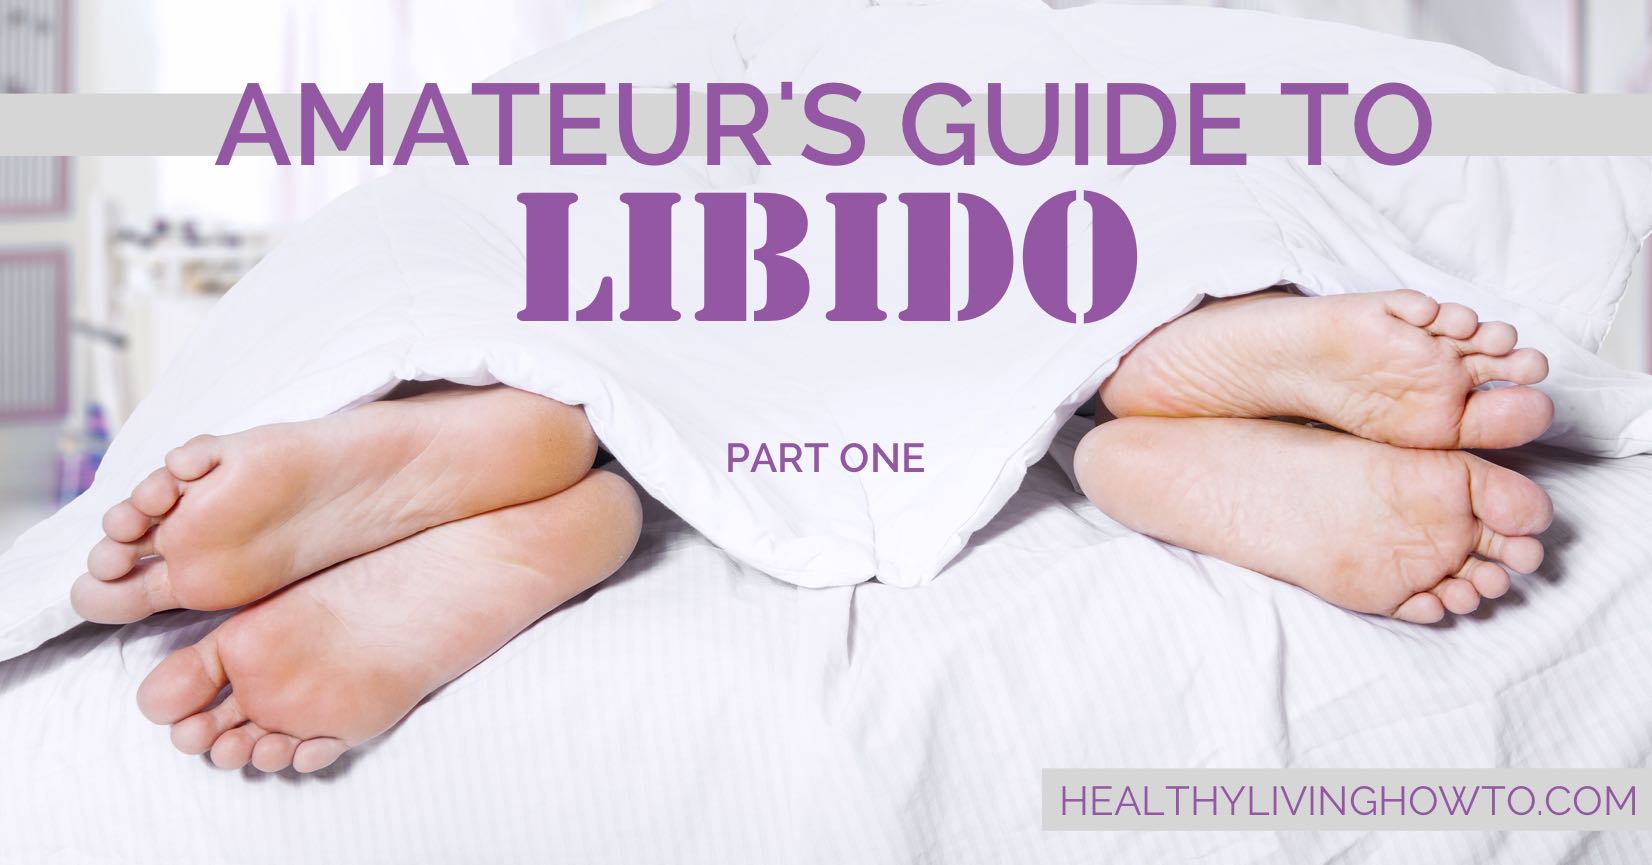 Amateur's Guide to Libido | healthylivinghowto.com